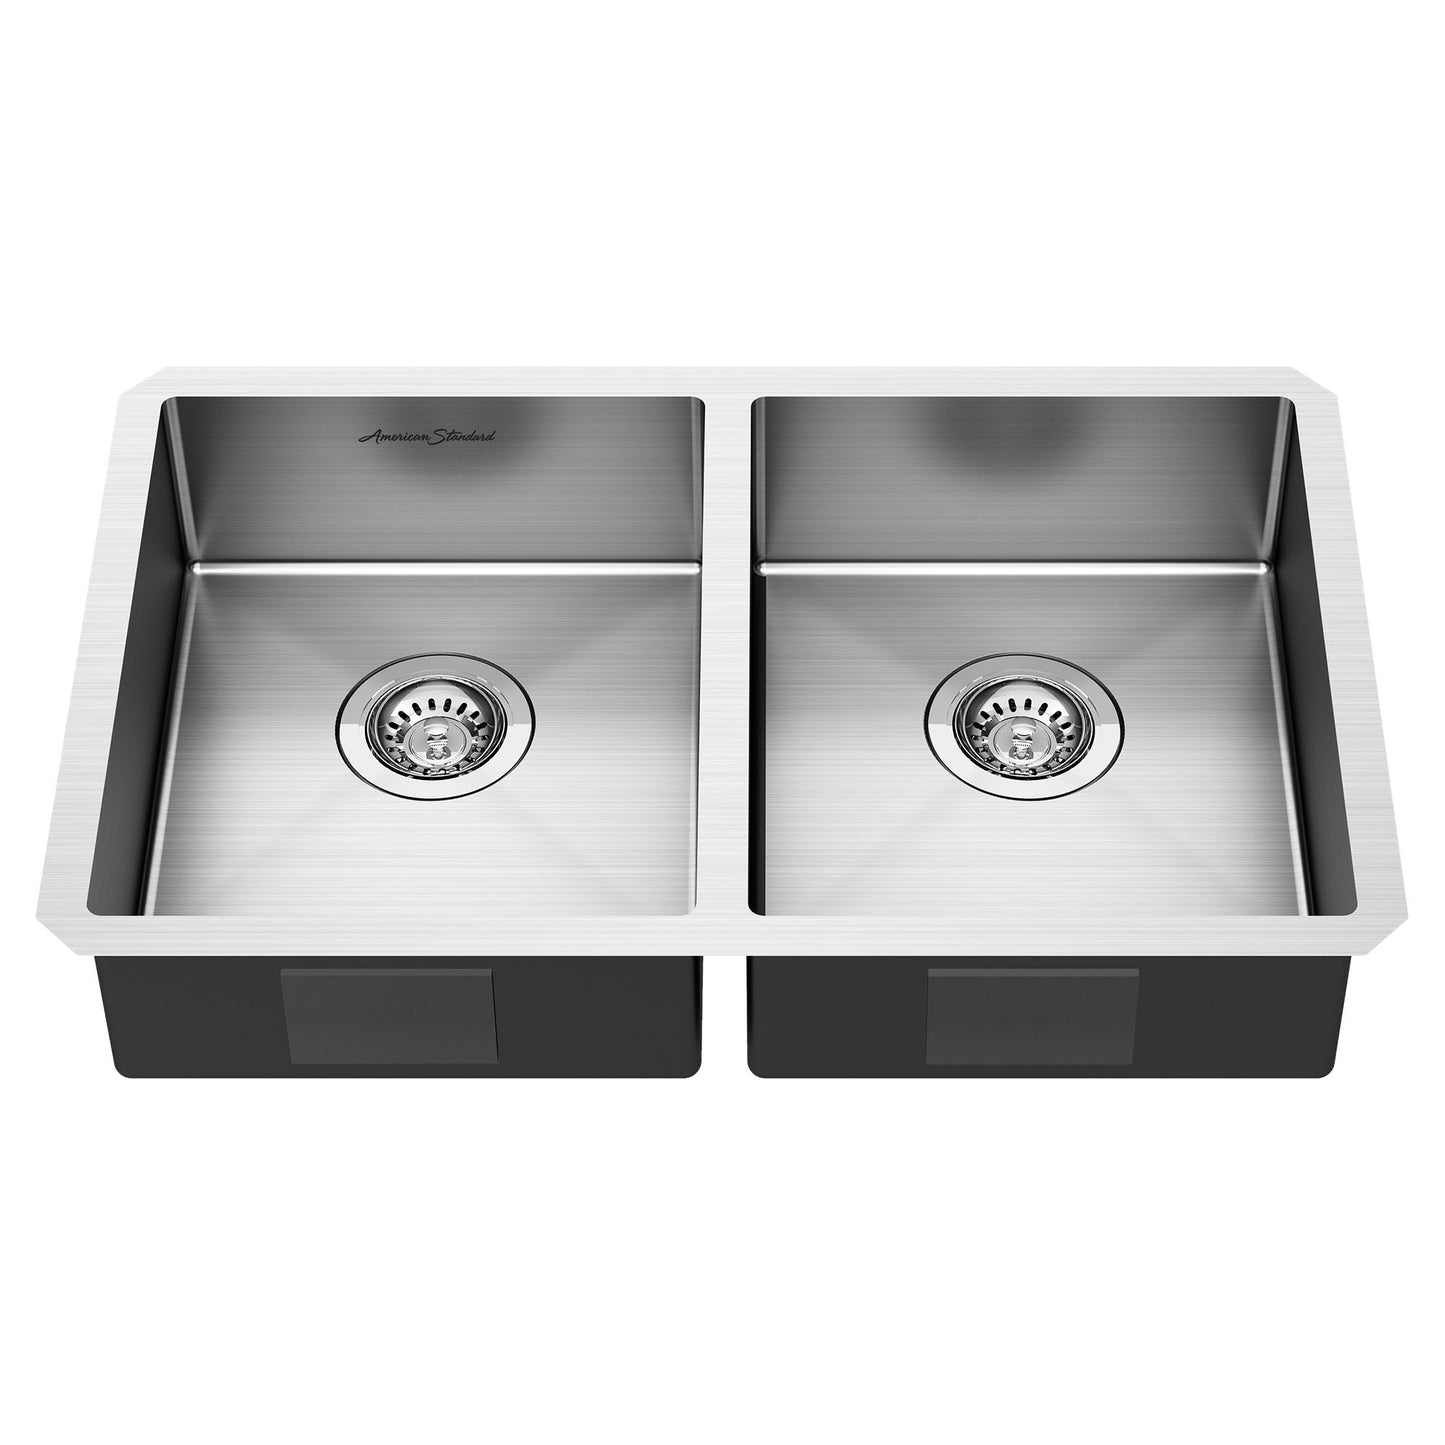 AMERICAN-STANDARD 18DB6291800.075, Pekoe 29 x 18-Inch Stainless Steel Undermount Double-Bowl ADA Kitchen Sink in Stainless Stl